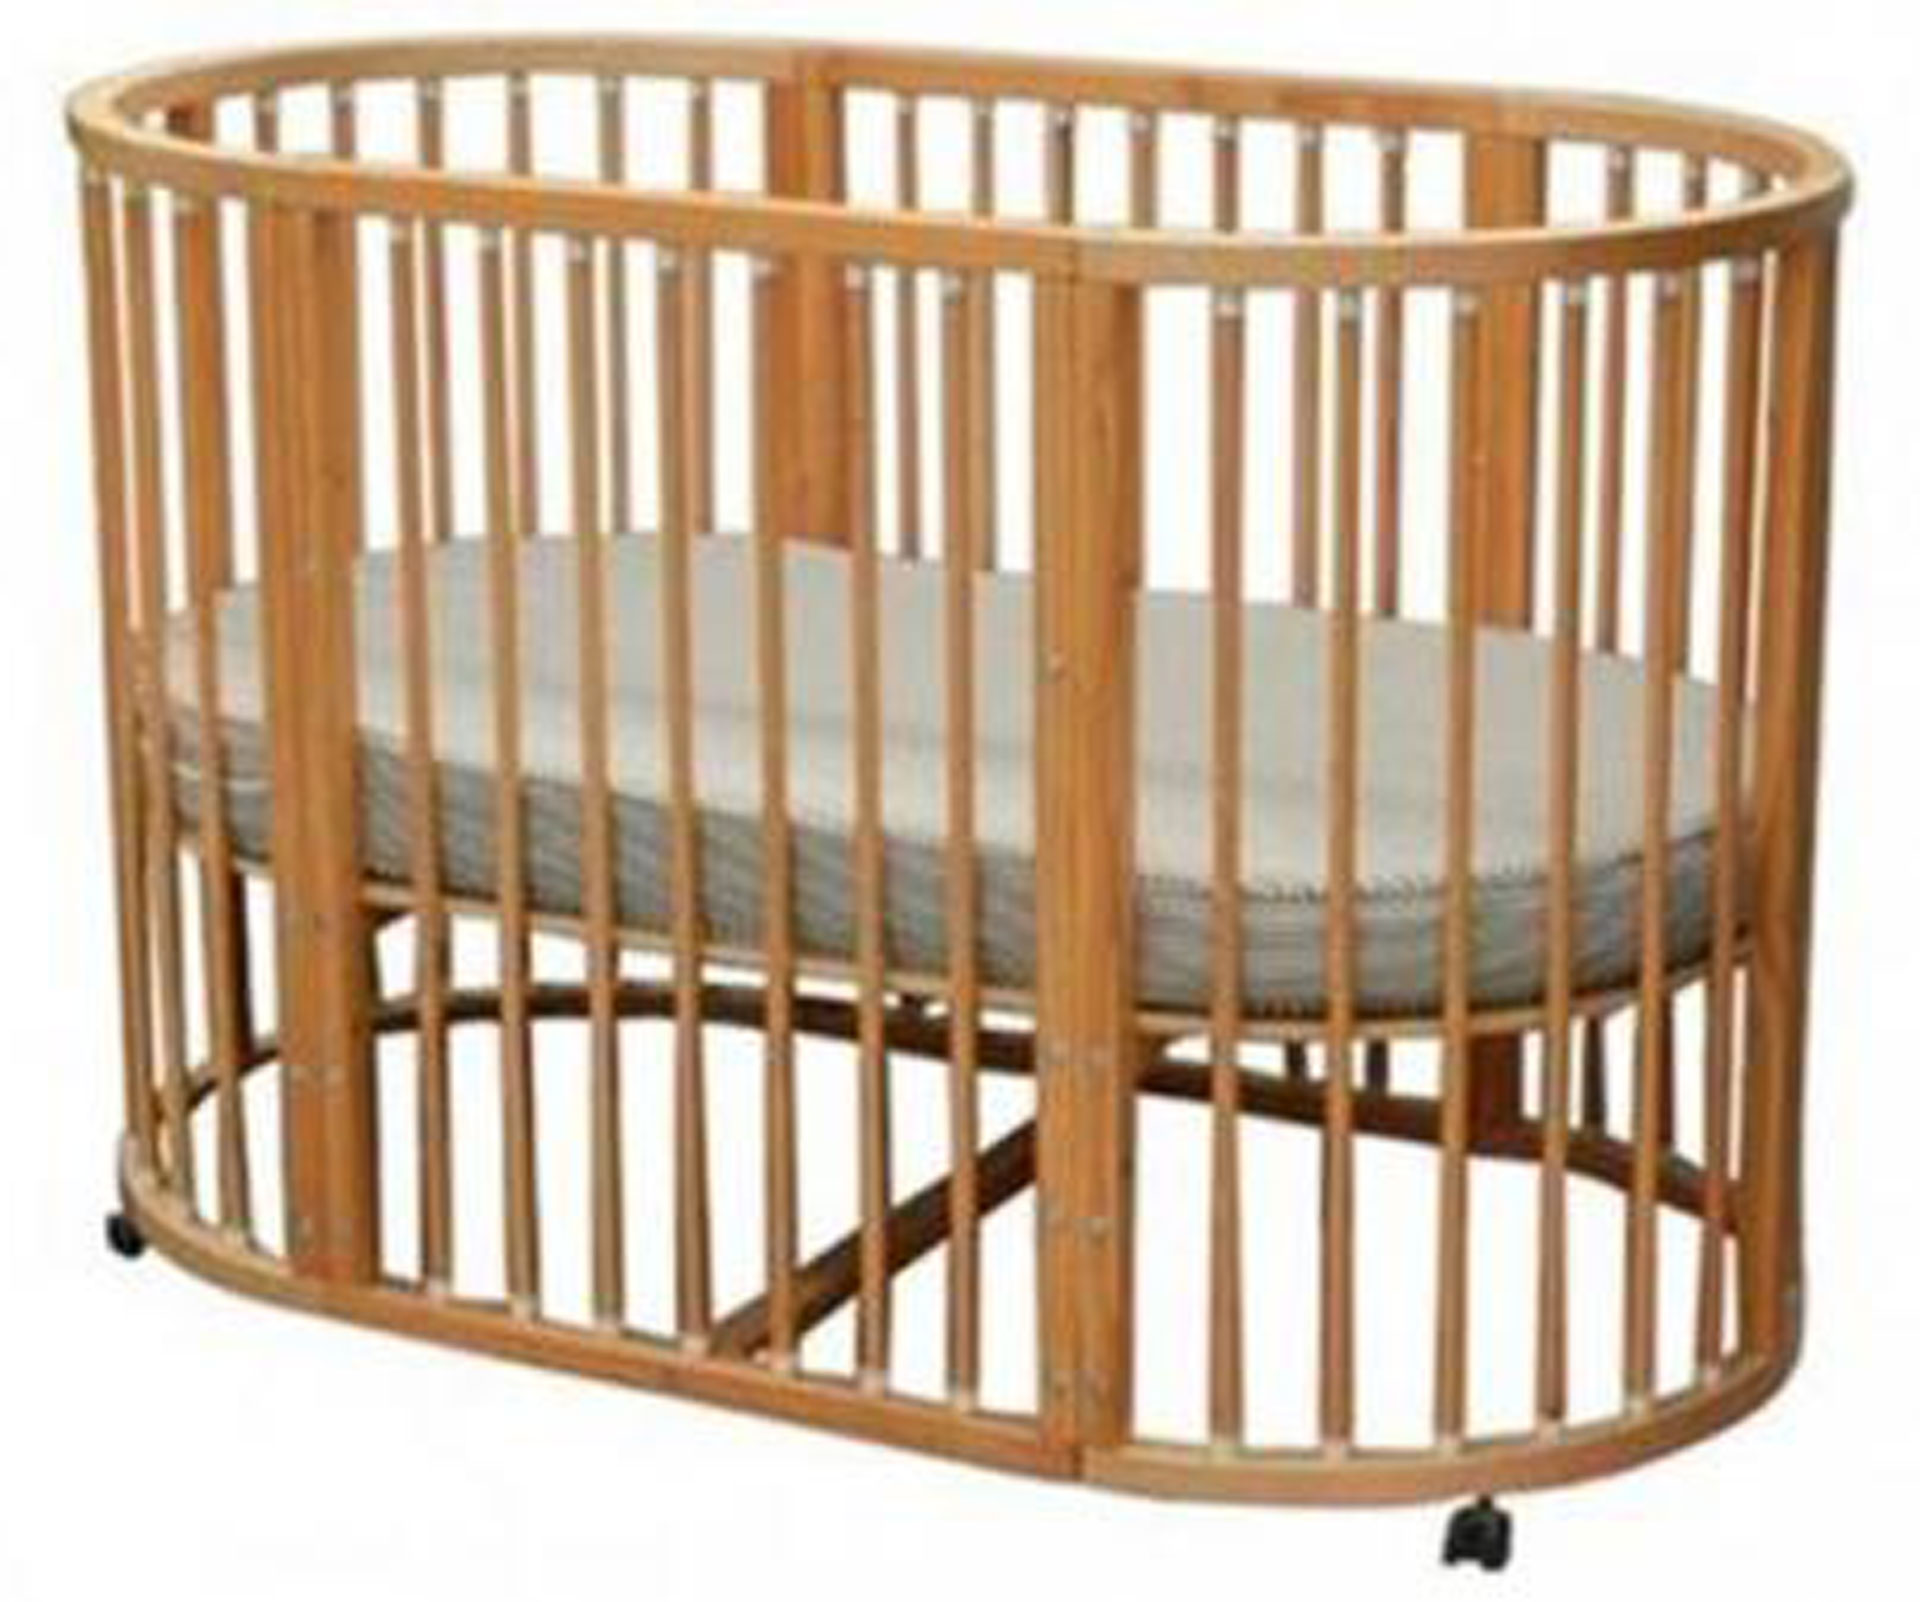 Cot recall: It scored “0” in CHOICE safety tests